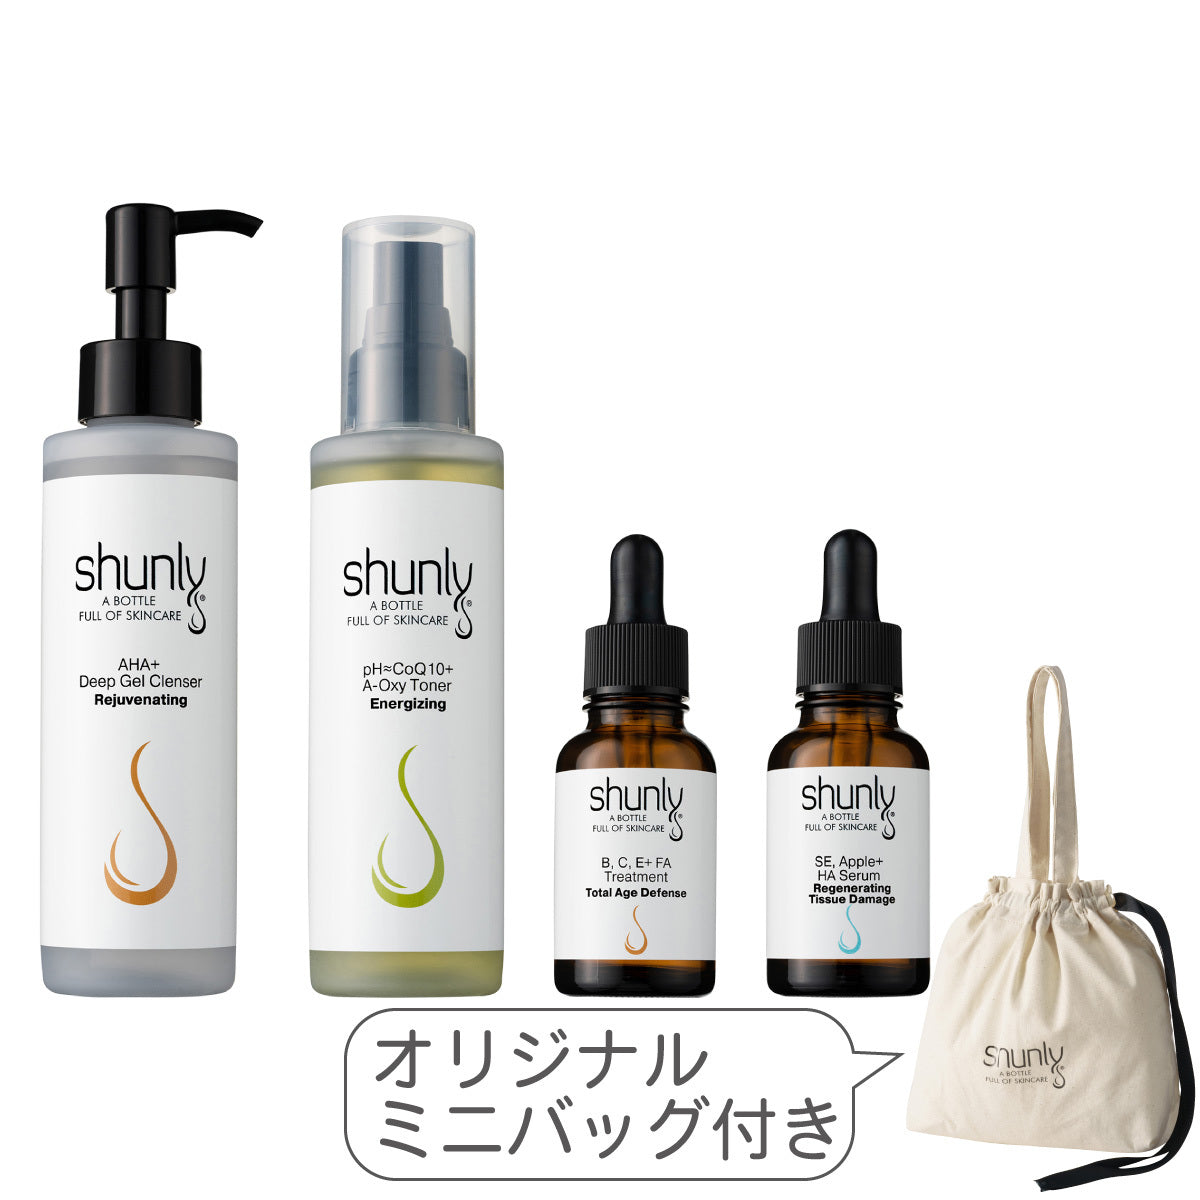 3 Step スキンケアセット – Shunly Skin Care